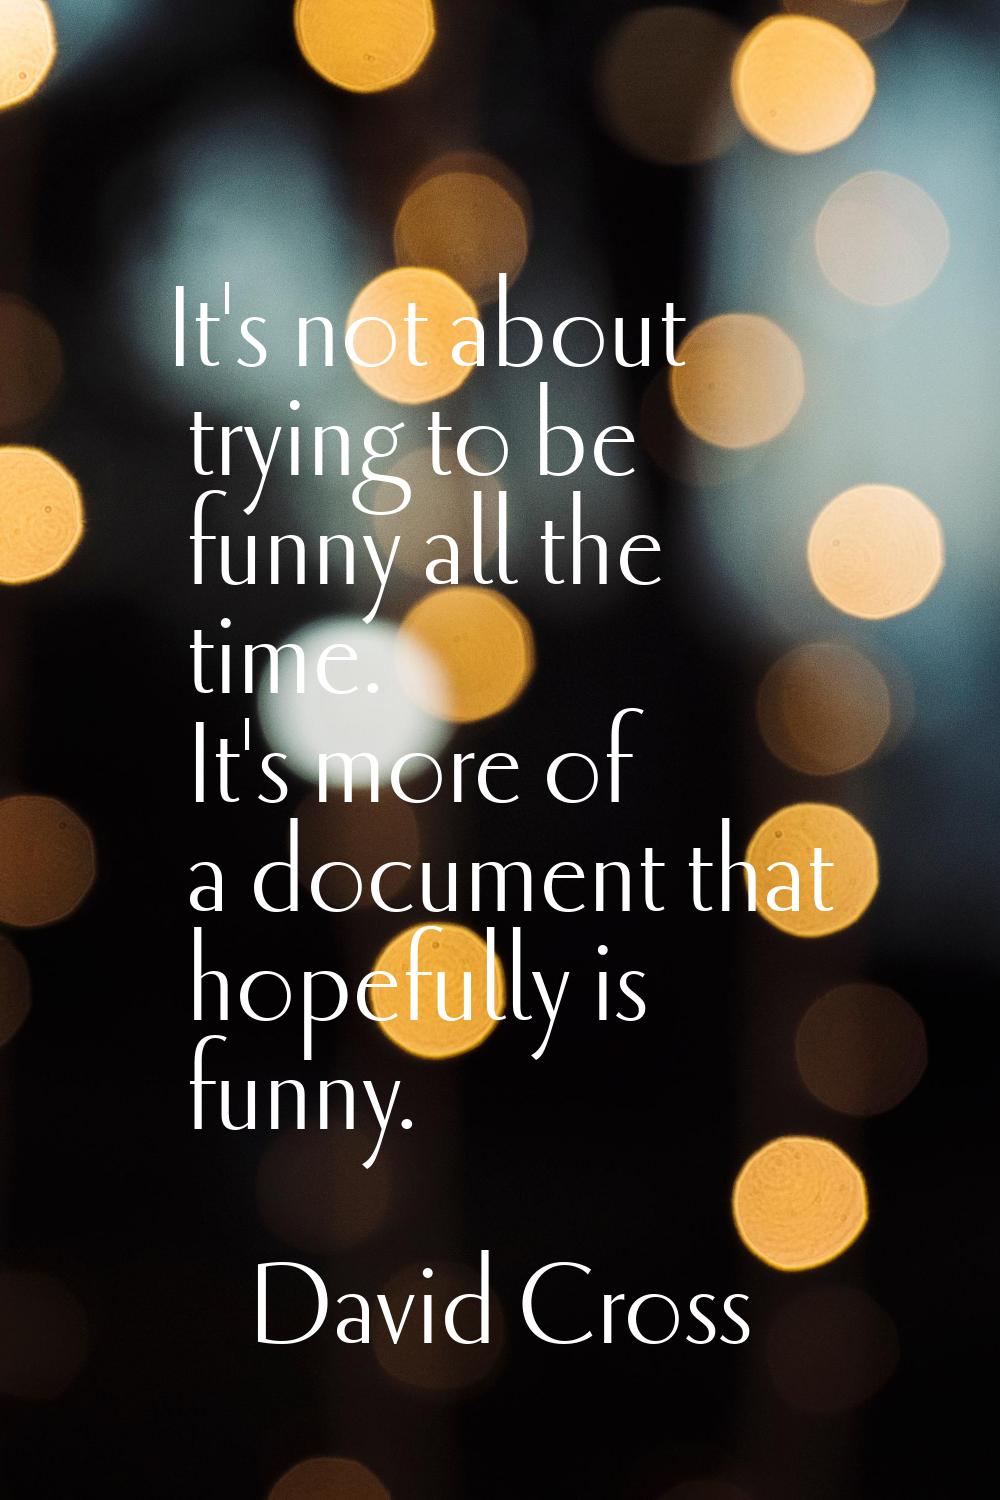 It's not about trying to be funny all the time. It's more of a document that hopefully is funny.